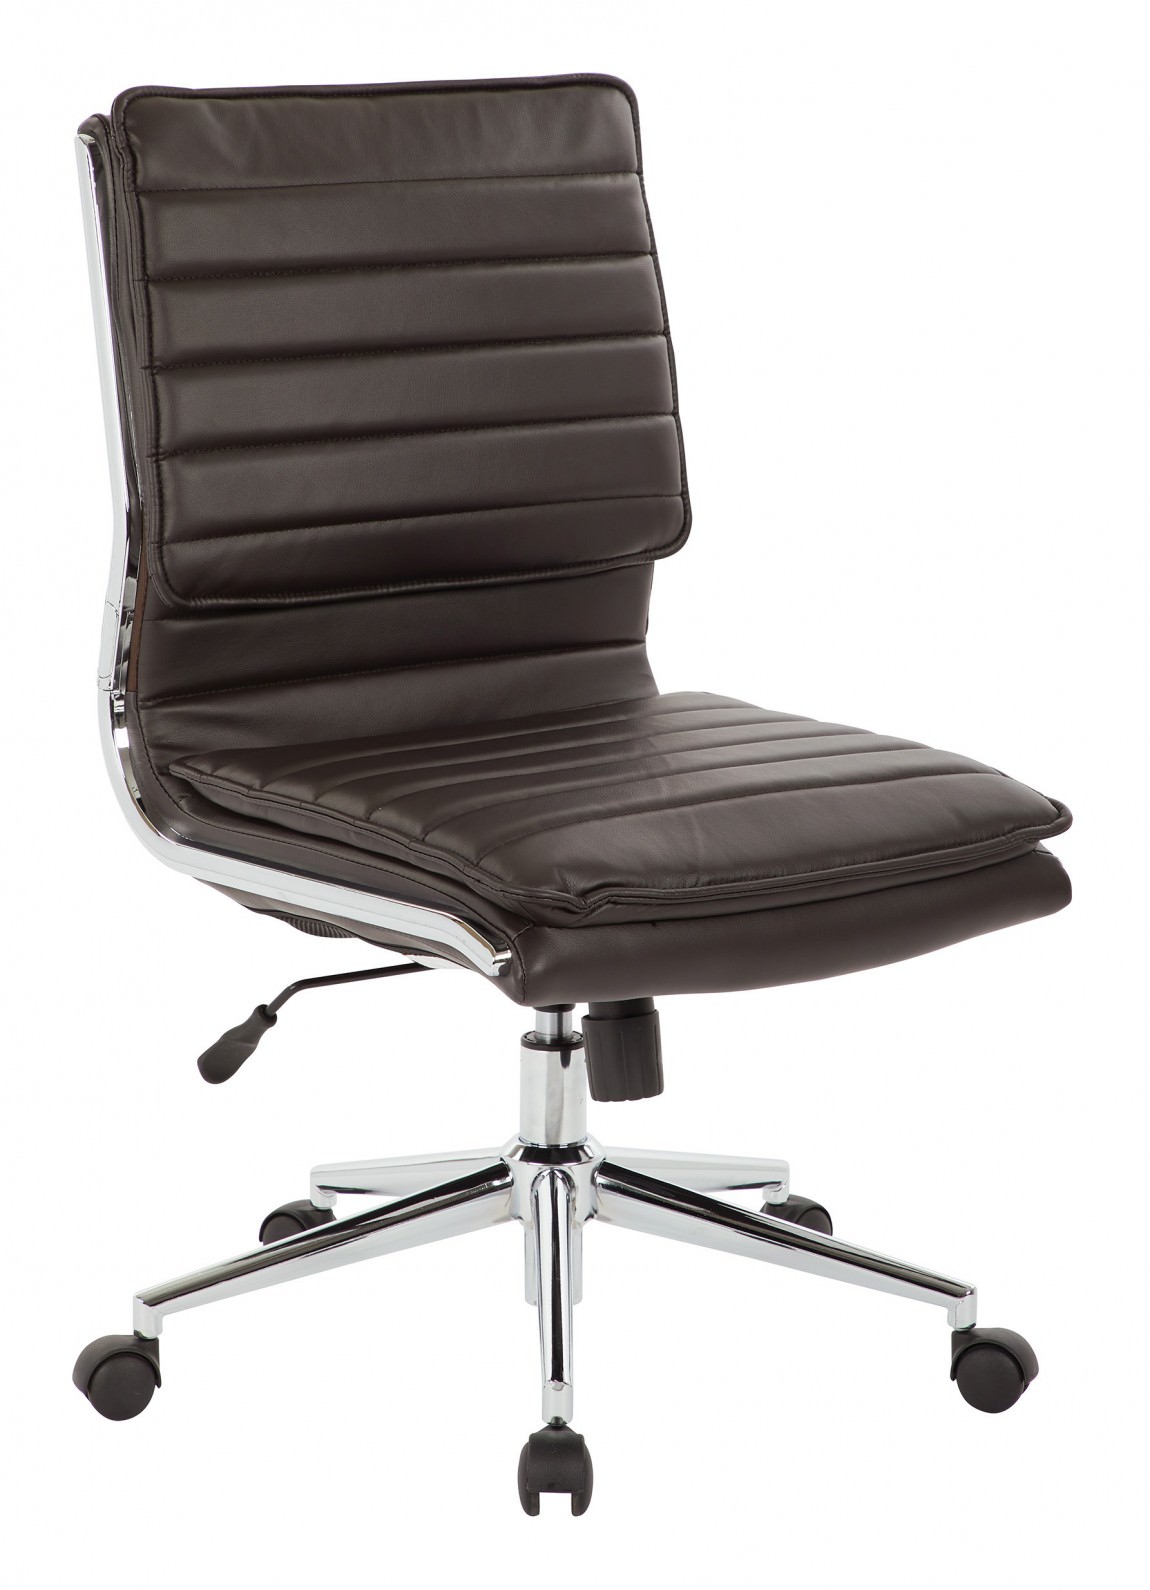 Ergonomic Executive Mid back PU Leather Office Chair Armless Side